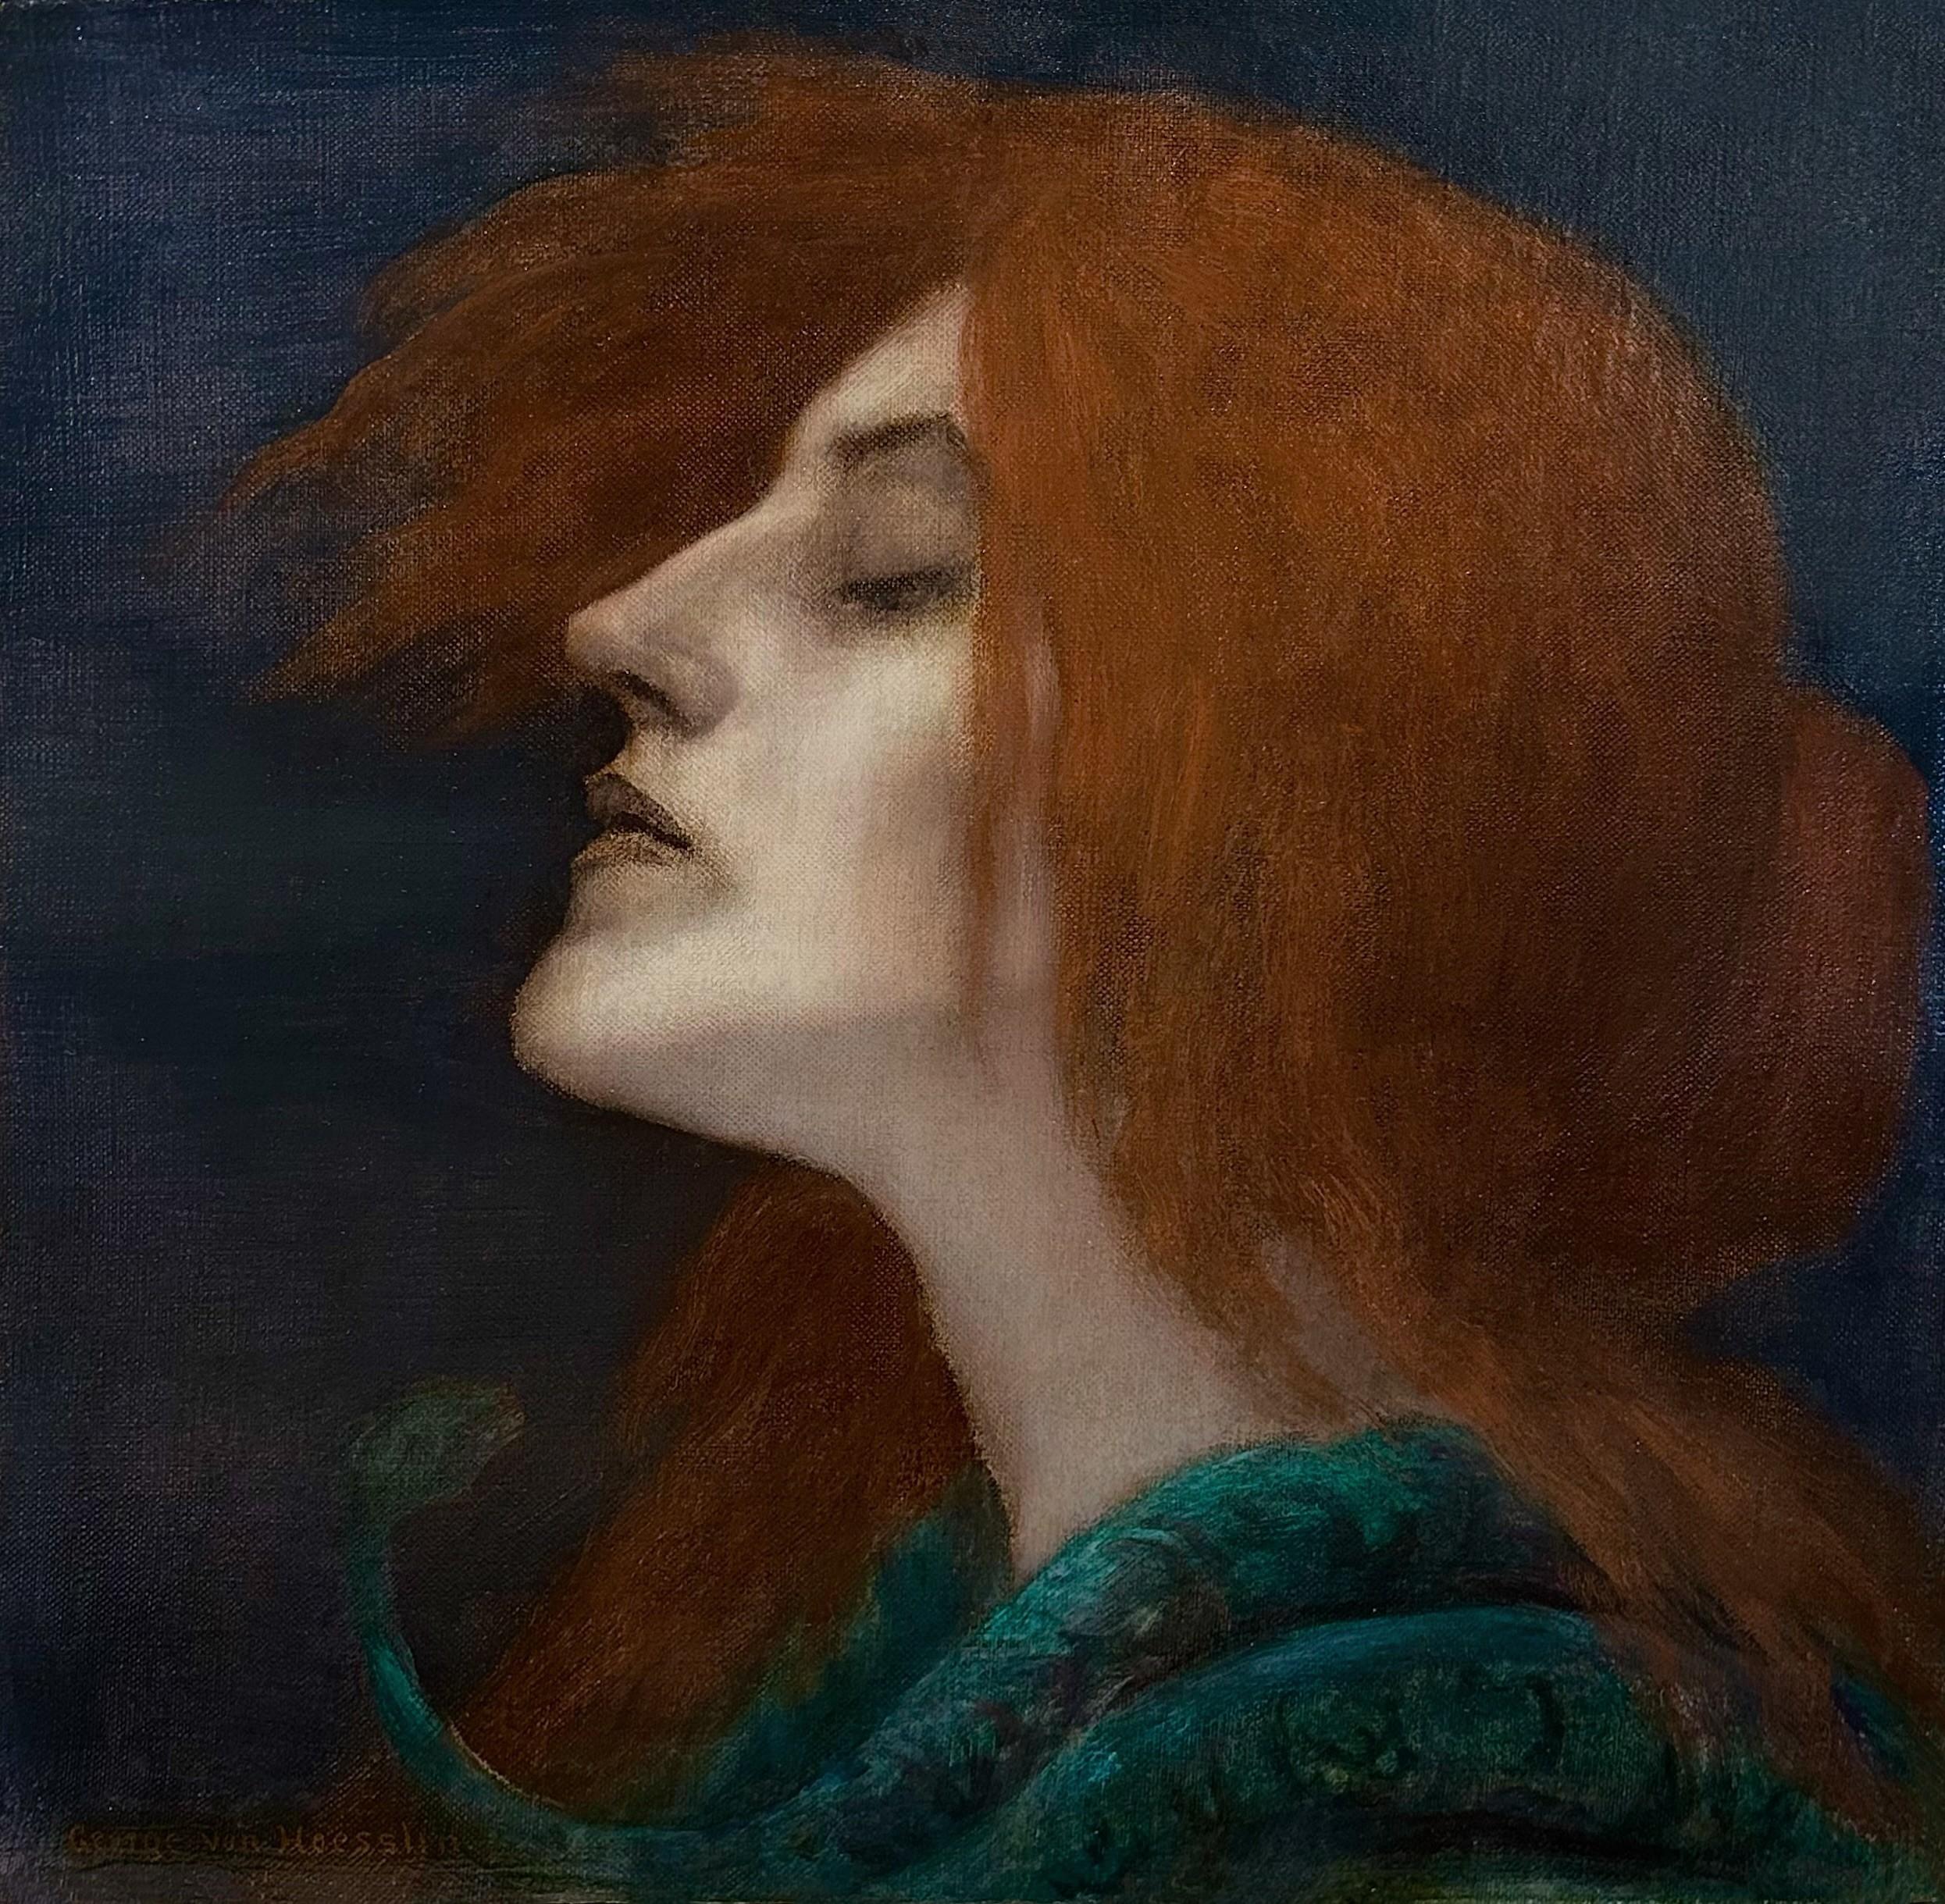 George Von Hoesslin Portrait Painting - Lilith and the Snake, Oil on canvas femme fatale mythical portrait, Signed